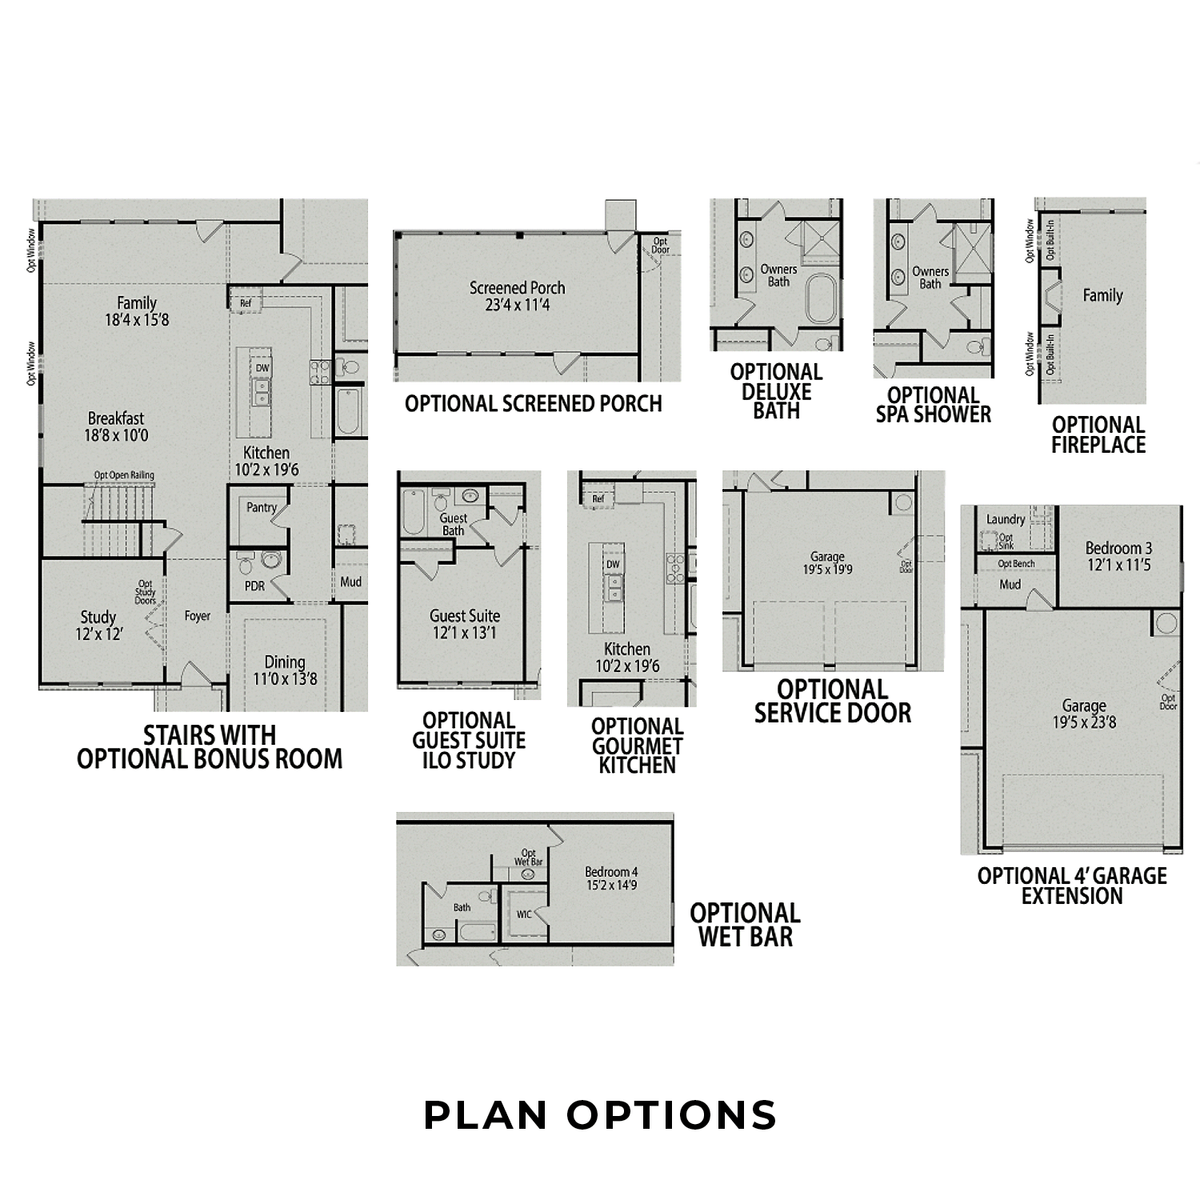 3 - The Magnolia A floor plan layout for 238 Harvester Road in Davidson Homes' Tobacco Road community.